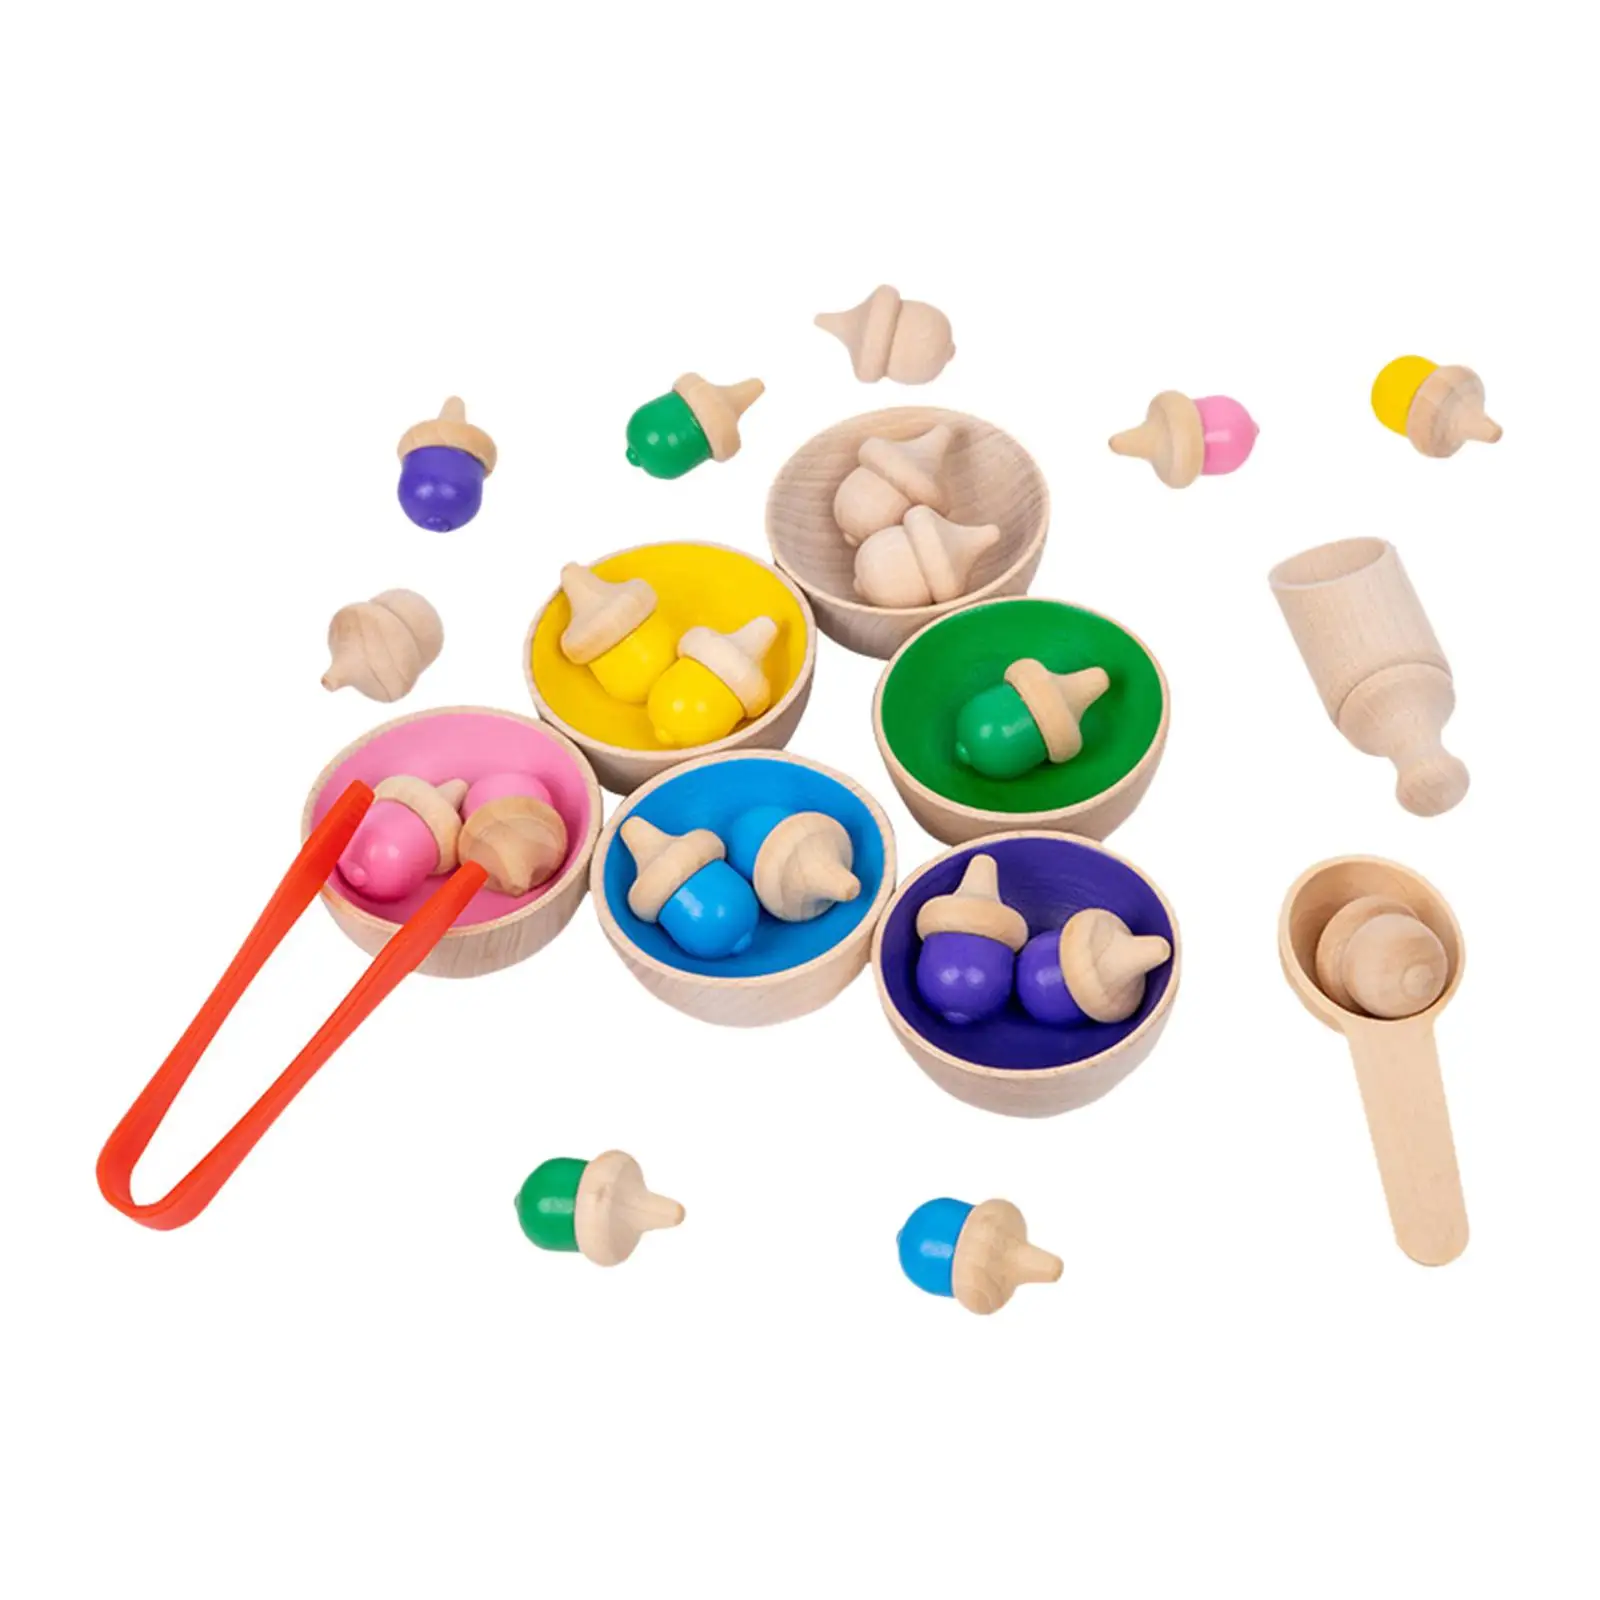 Wooden Rainbow Balls in Cups Montessori Toy Training Logical Thinking for Girls Boys